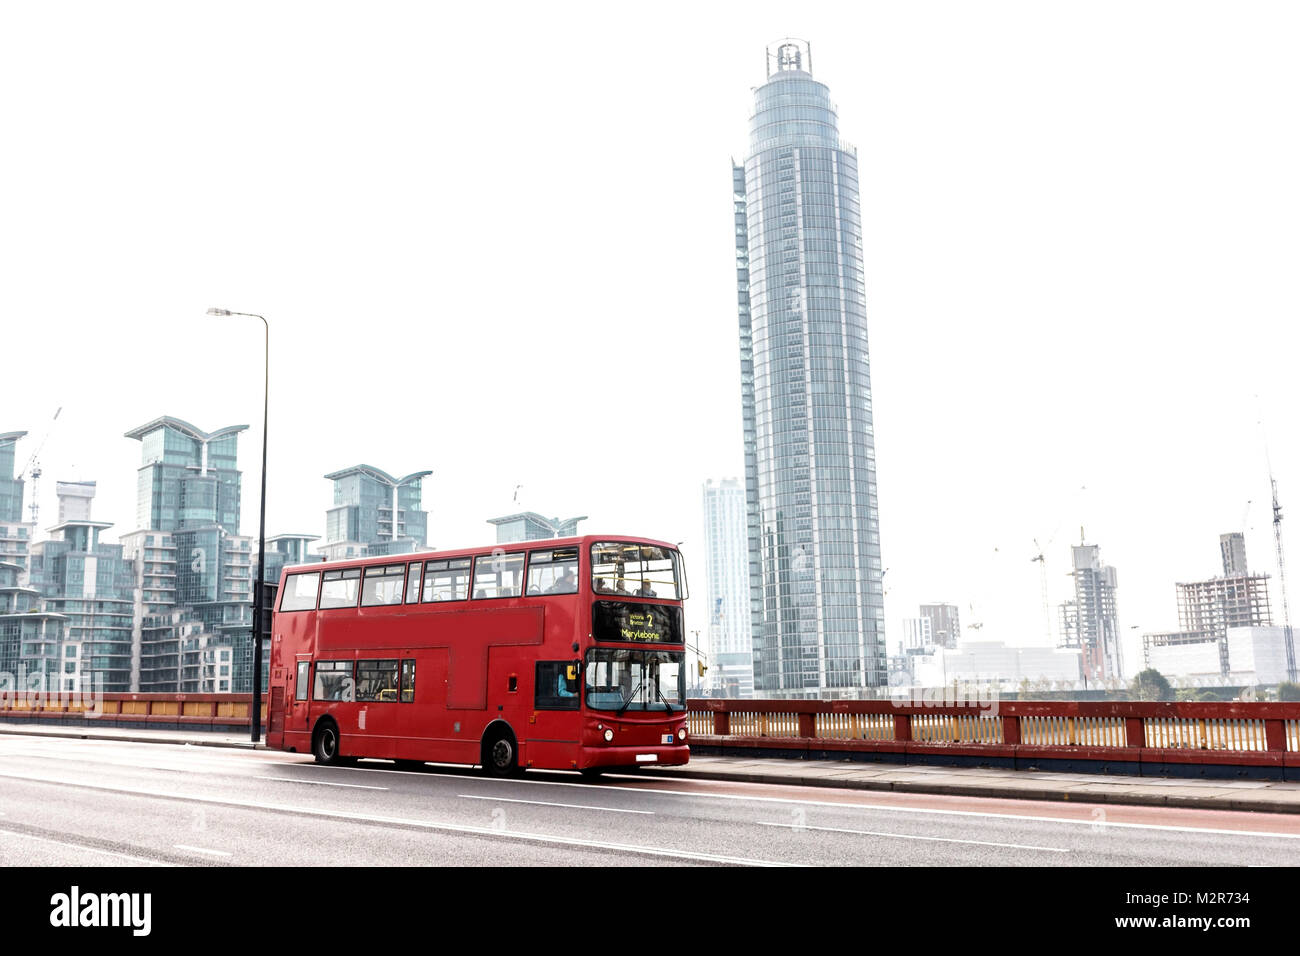 A red double-decker bus on a bridge in London Stock Photo